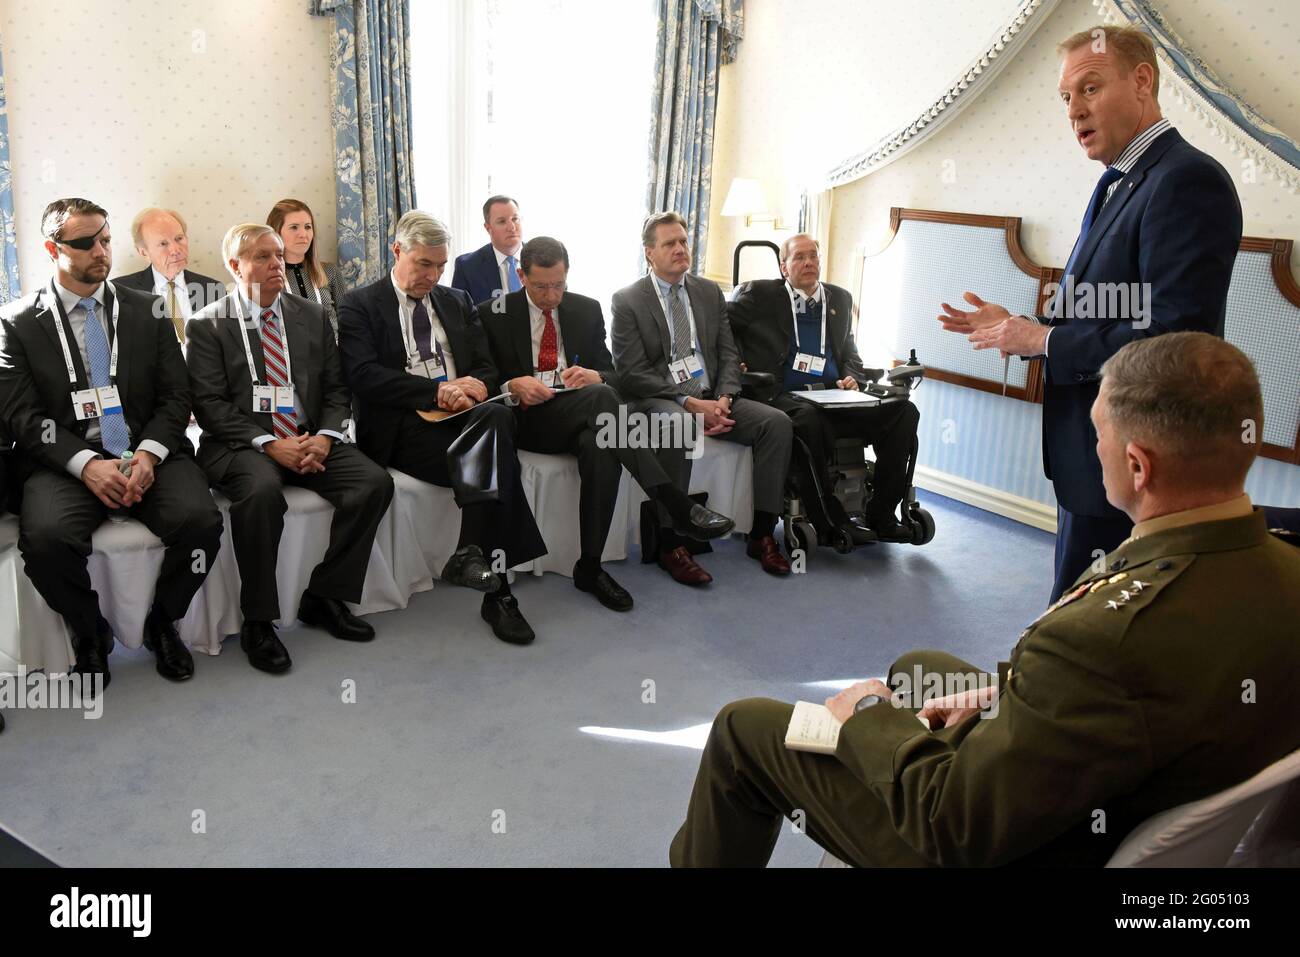 Reportage:   U.S. Acting Secretary of Defense Patrick M. Shanahan meets with a congressional delegation led by U.S. Senator Lindsey Graham, on the sidelines of the Munich Security Conference, Munich, Germany, Feb. 16, 2019. Stock Photo